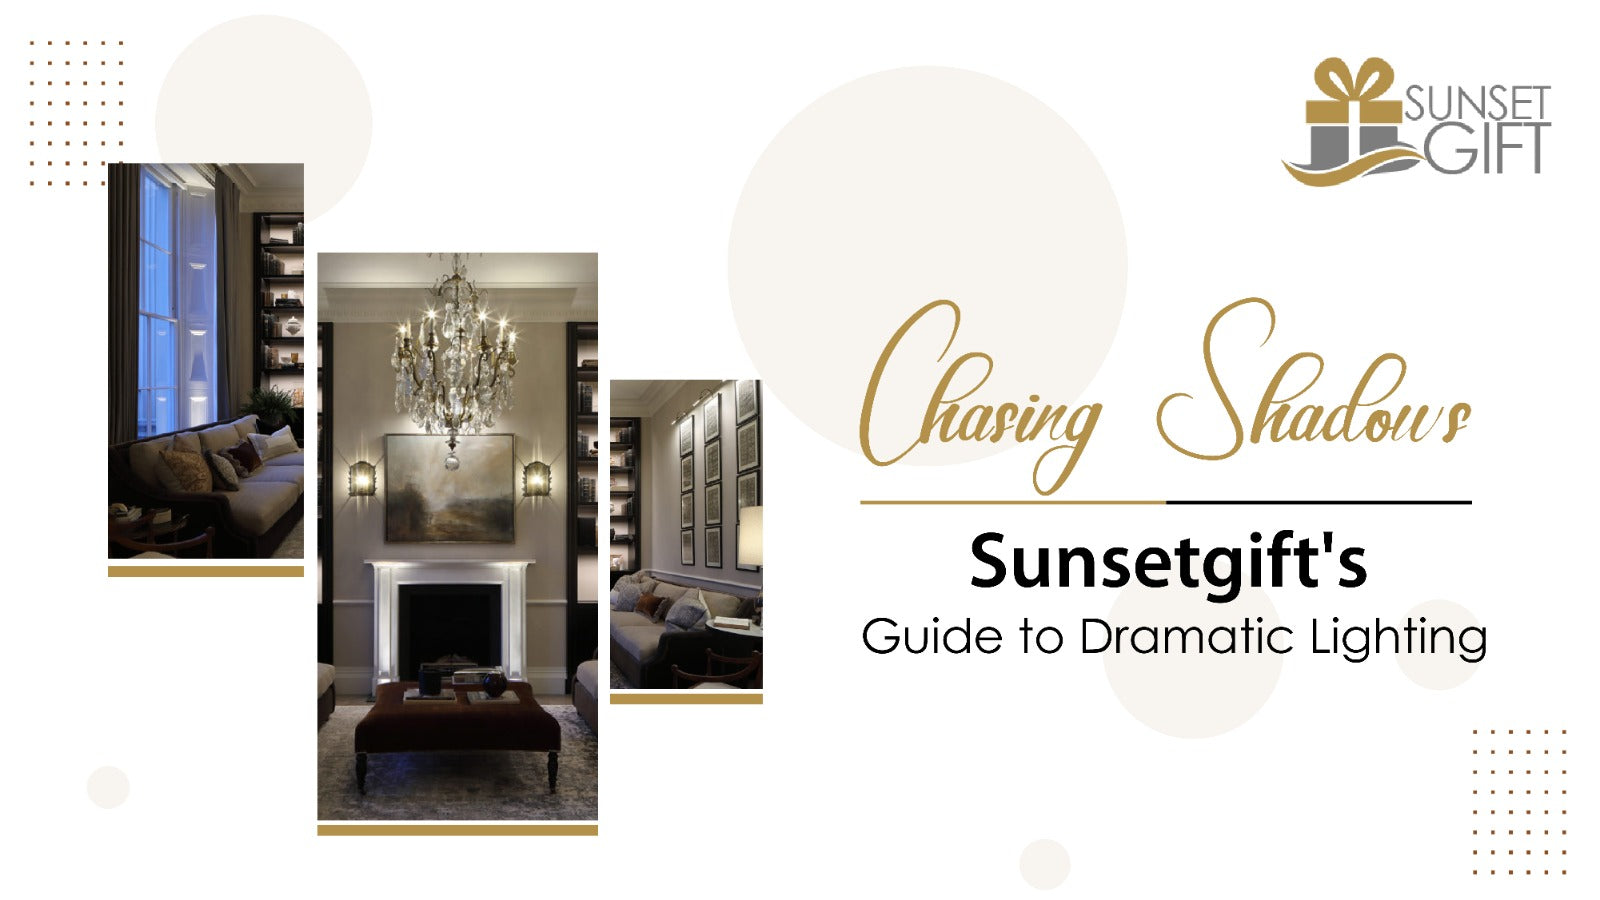 Chasing Shadows: Sunsetgift's Guide to Dramatic Lighting